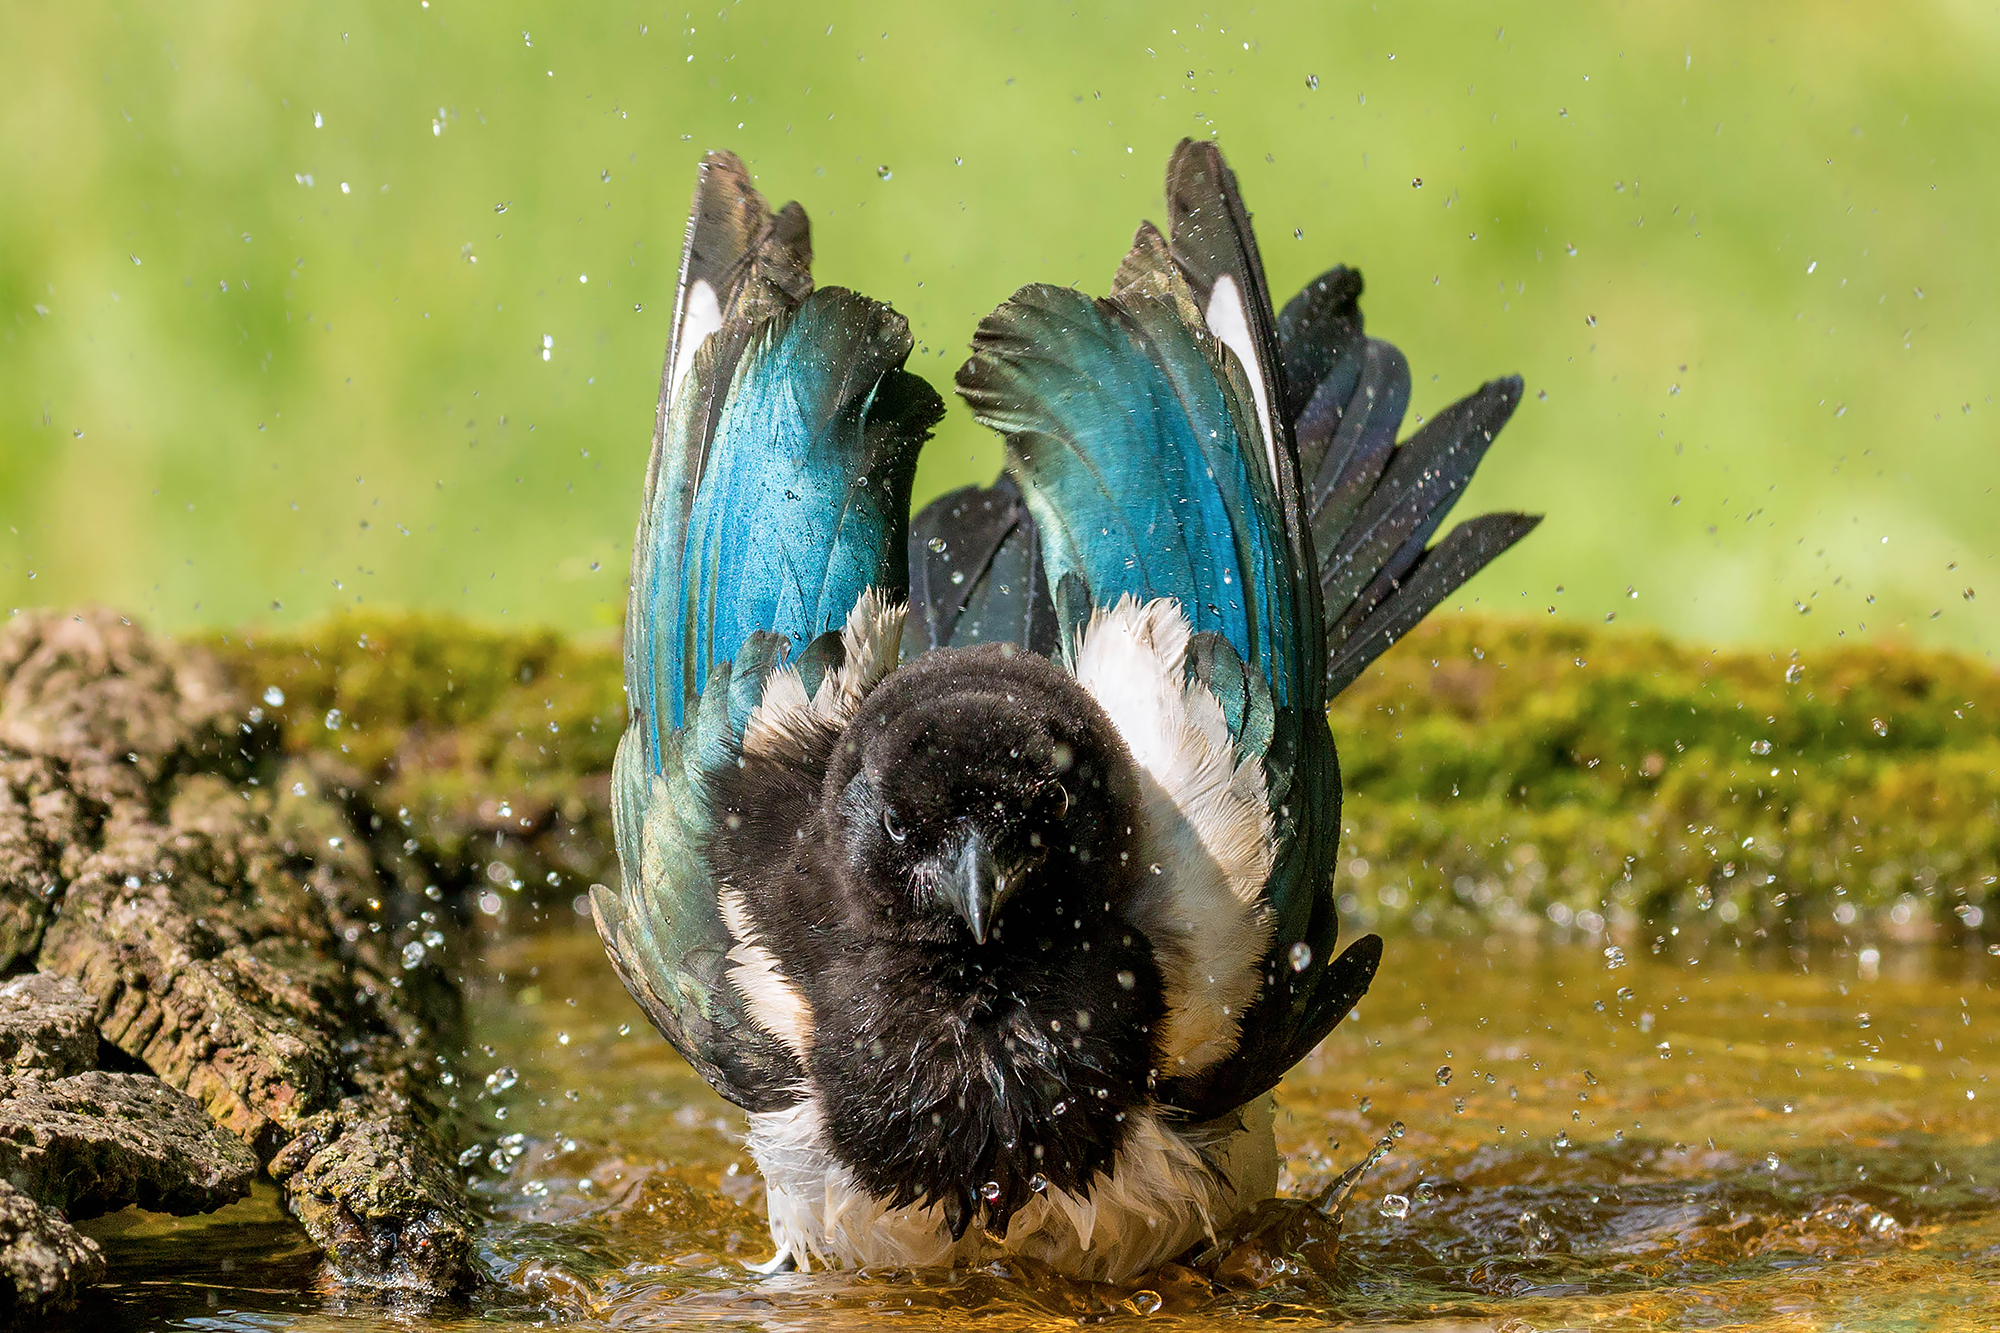 Thieving magpie in the bathroom...